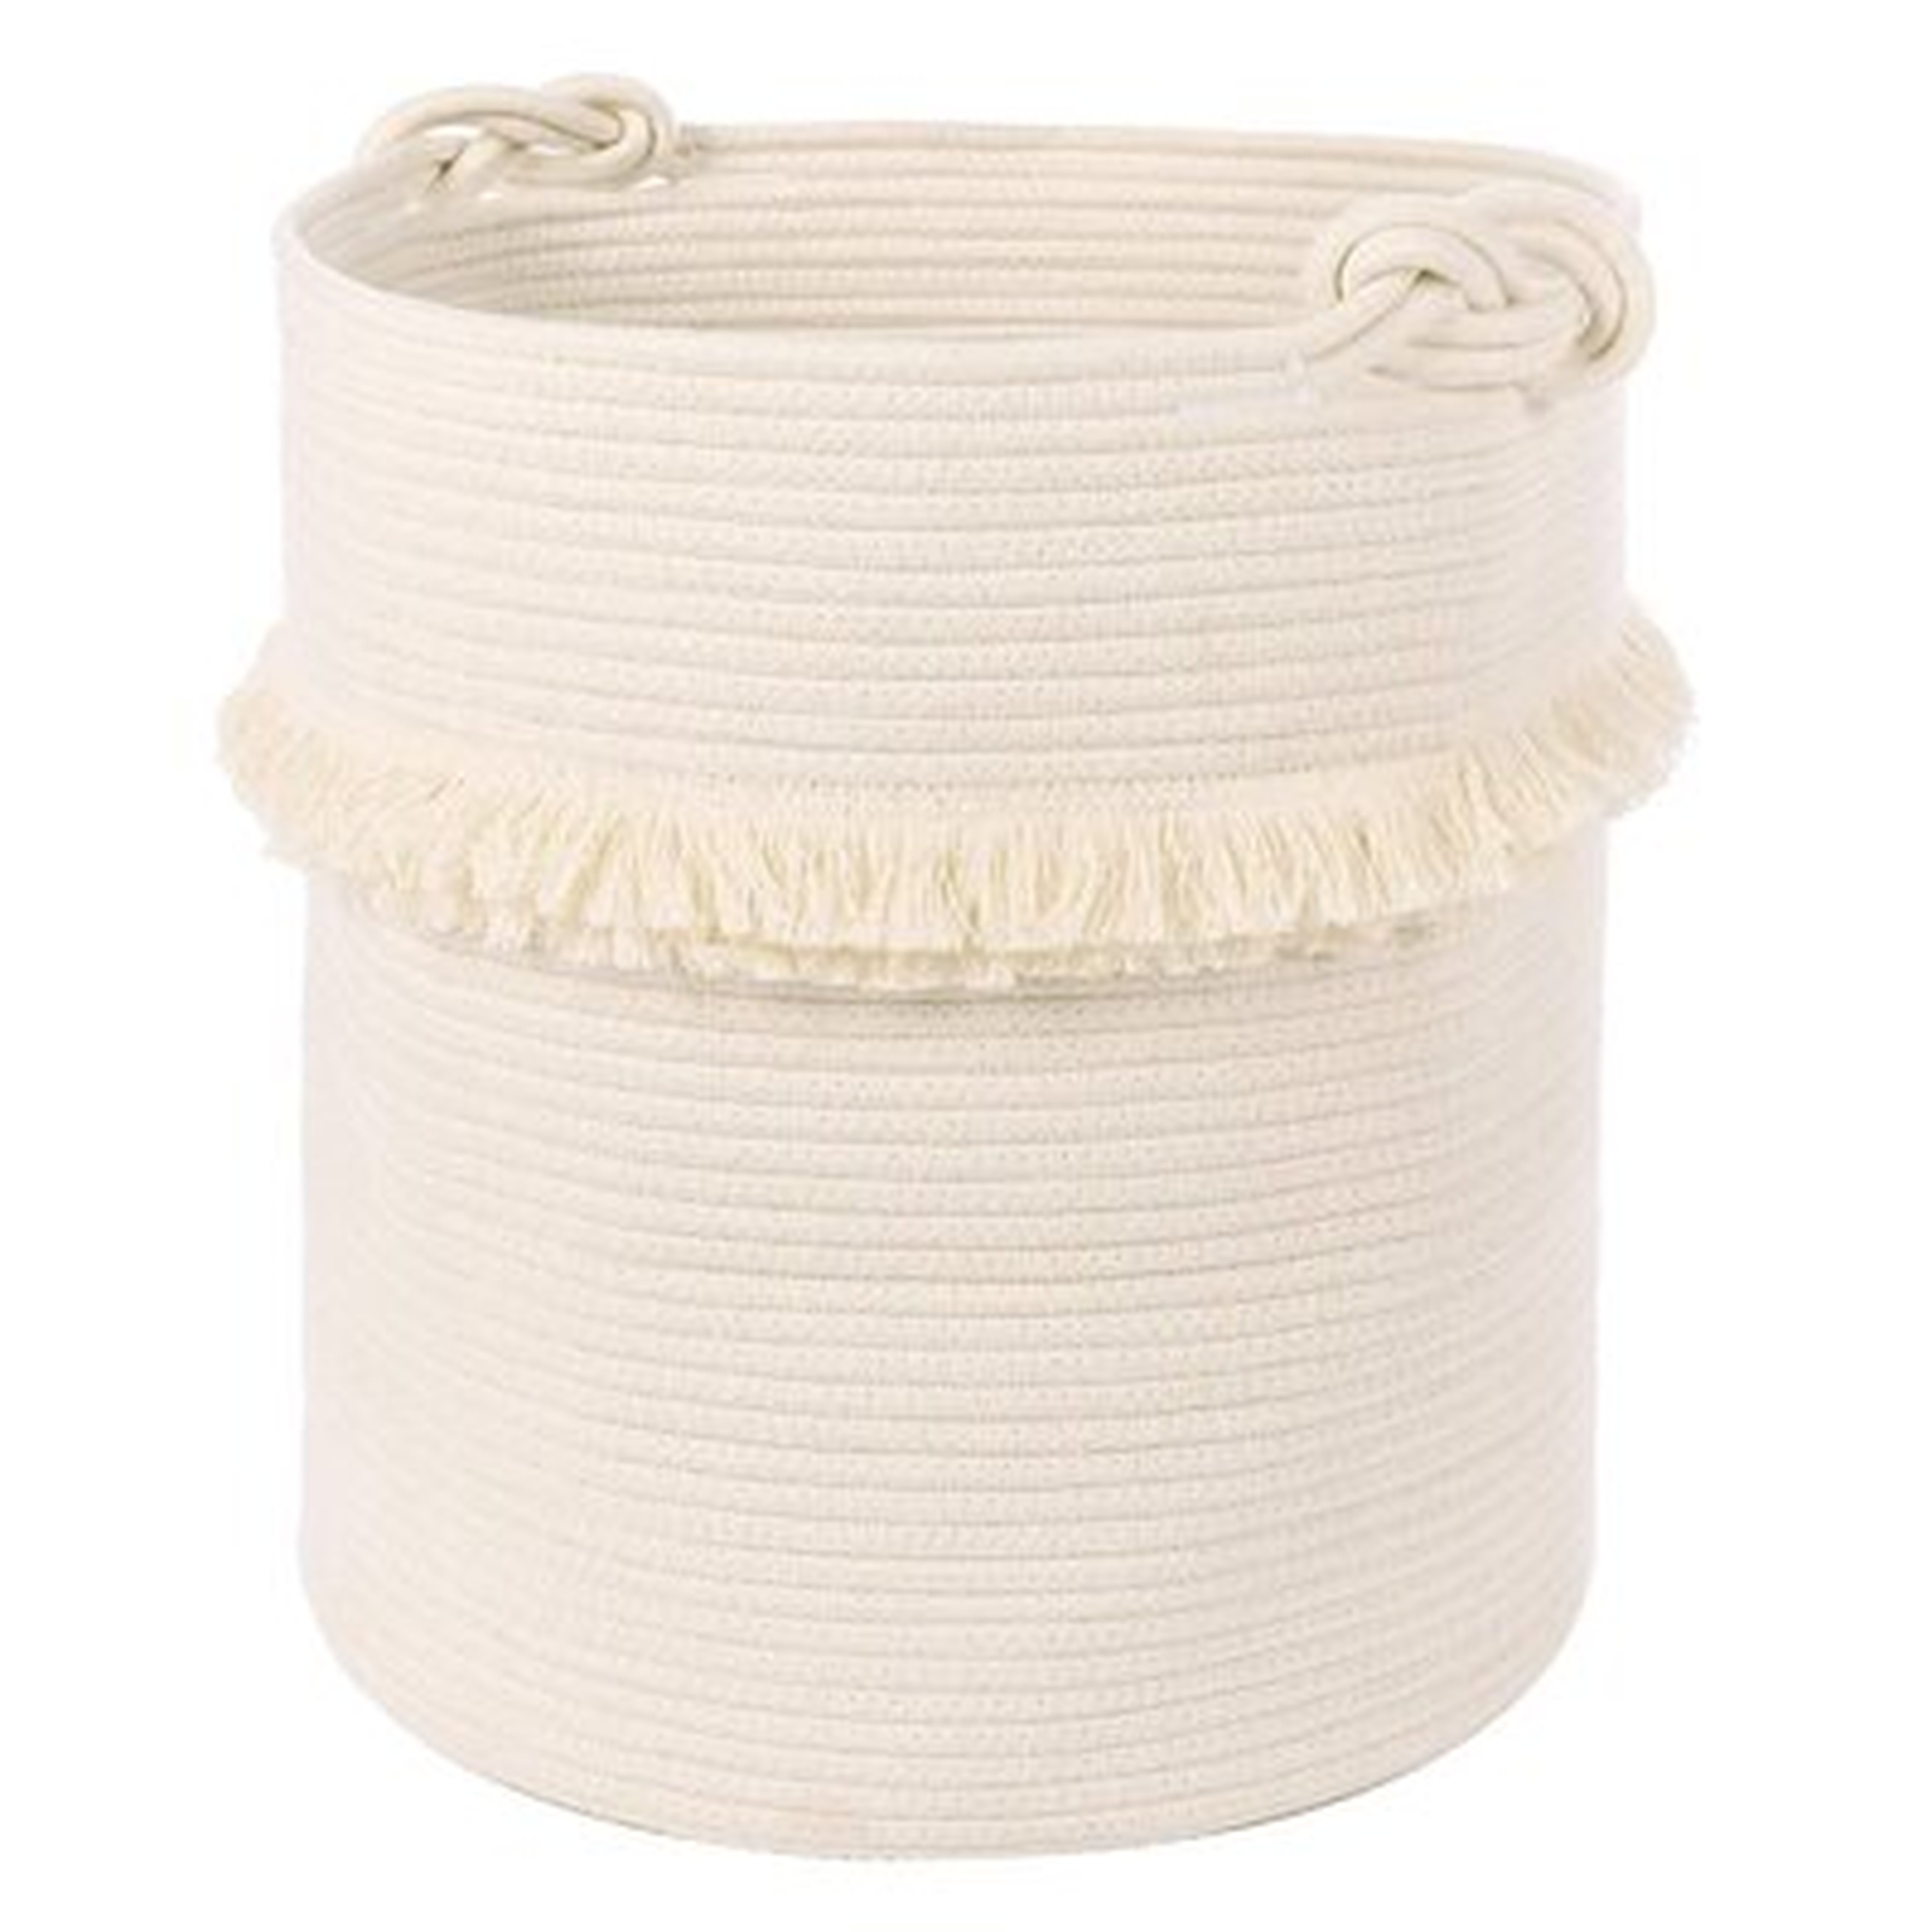 Extra Large Woven Storage Baskets – 17'' X 16'' Cotton Rope Decorative Hamper For Magazine, Toys, Blankets, And Laundry, Cute Tassel Nursery Decor - Home Storage Container - Wayfair